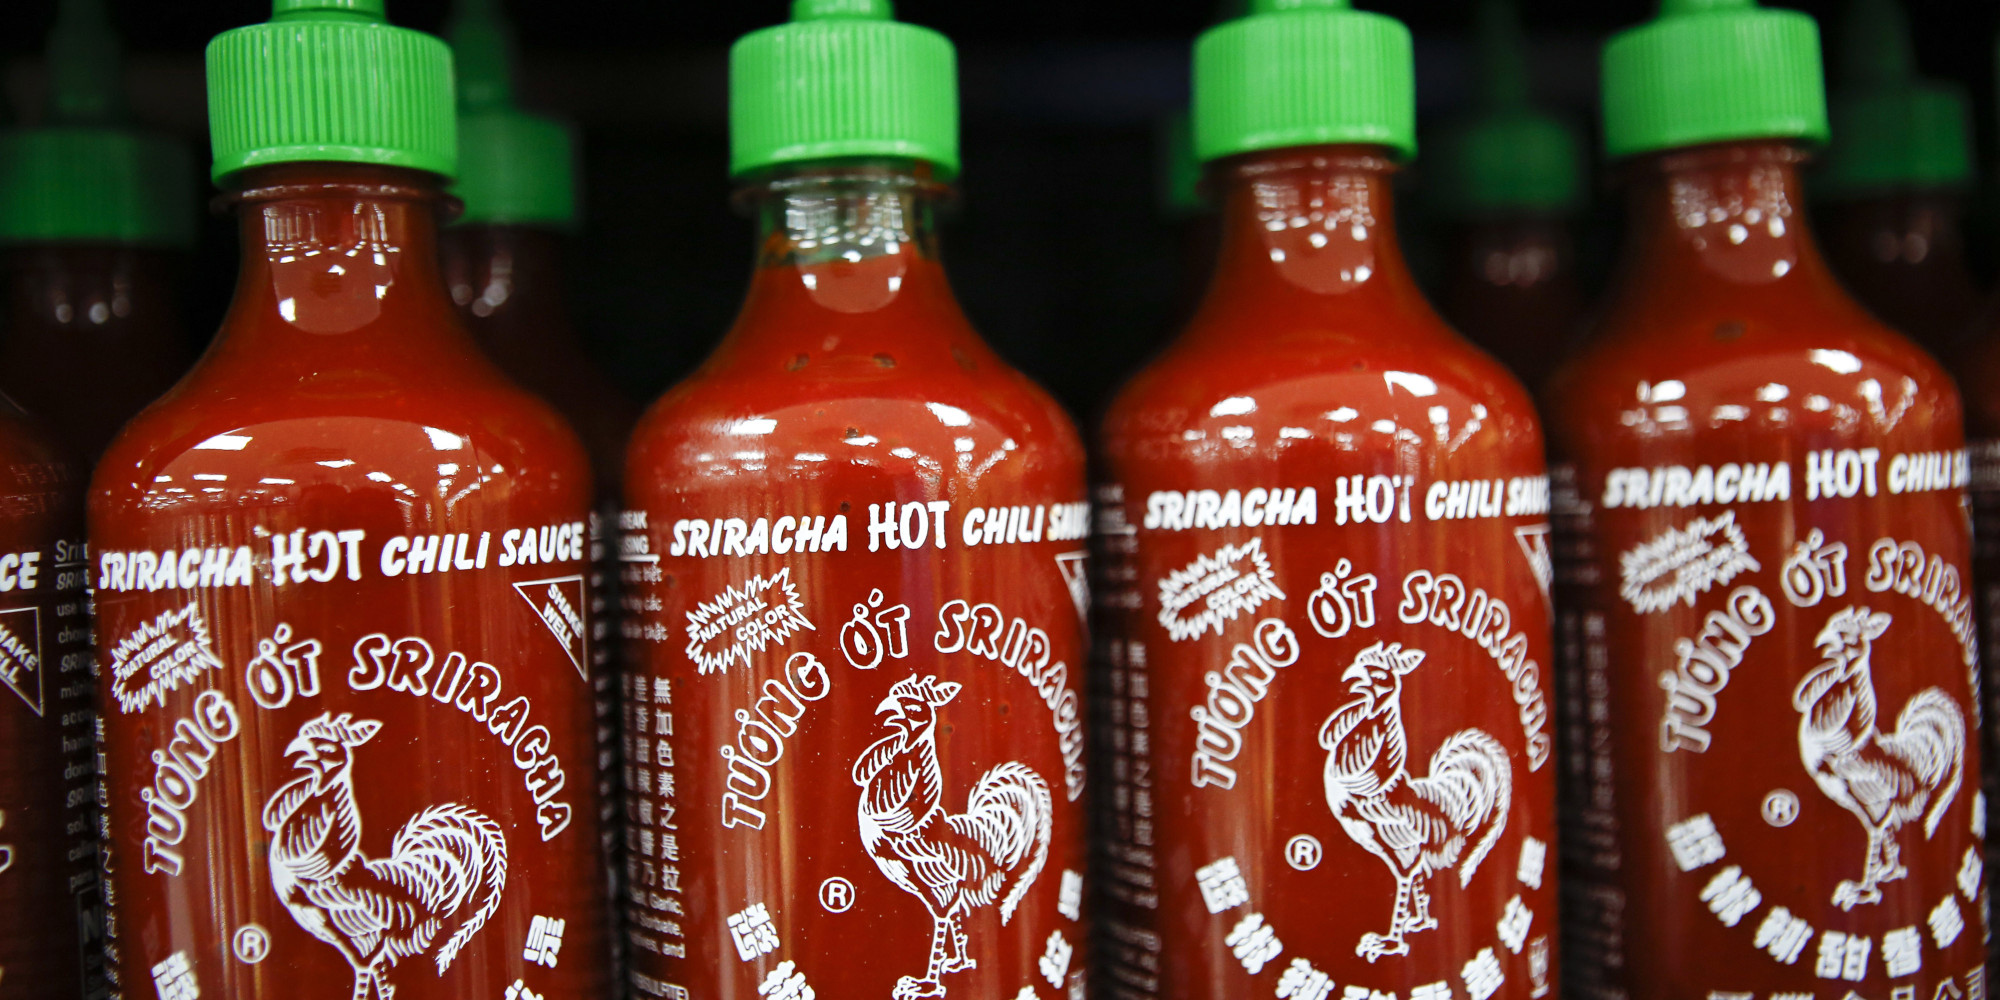 Huy Fong Foods Inc. Sriracha sauce is displayed for sale during the grand opening of a Wal-Mart Stores Inc. location in the Chinatown neighborhood of Los Angeles, California, U.S., on Thursday, Sept. 19, 2013. Wal-Mart Stores Inc. will phase out 10 chemicals it sells in favor of safer alternatives and disclose the chemicals contained in four product categories, the company announced Sept. 12. Photographer: Patrick T. Fallon/Bloomberg via Getty Images